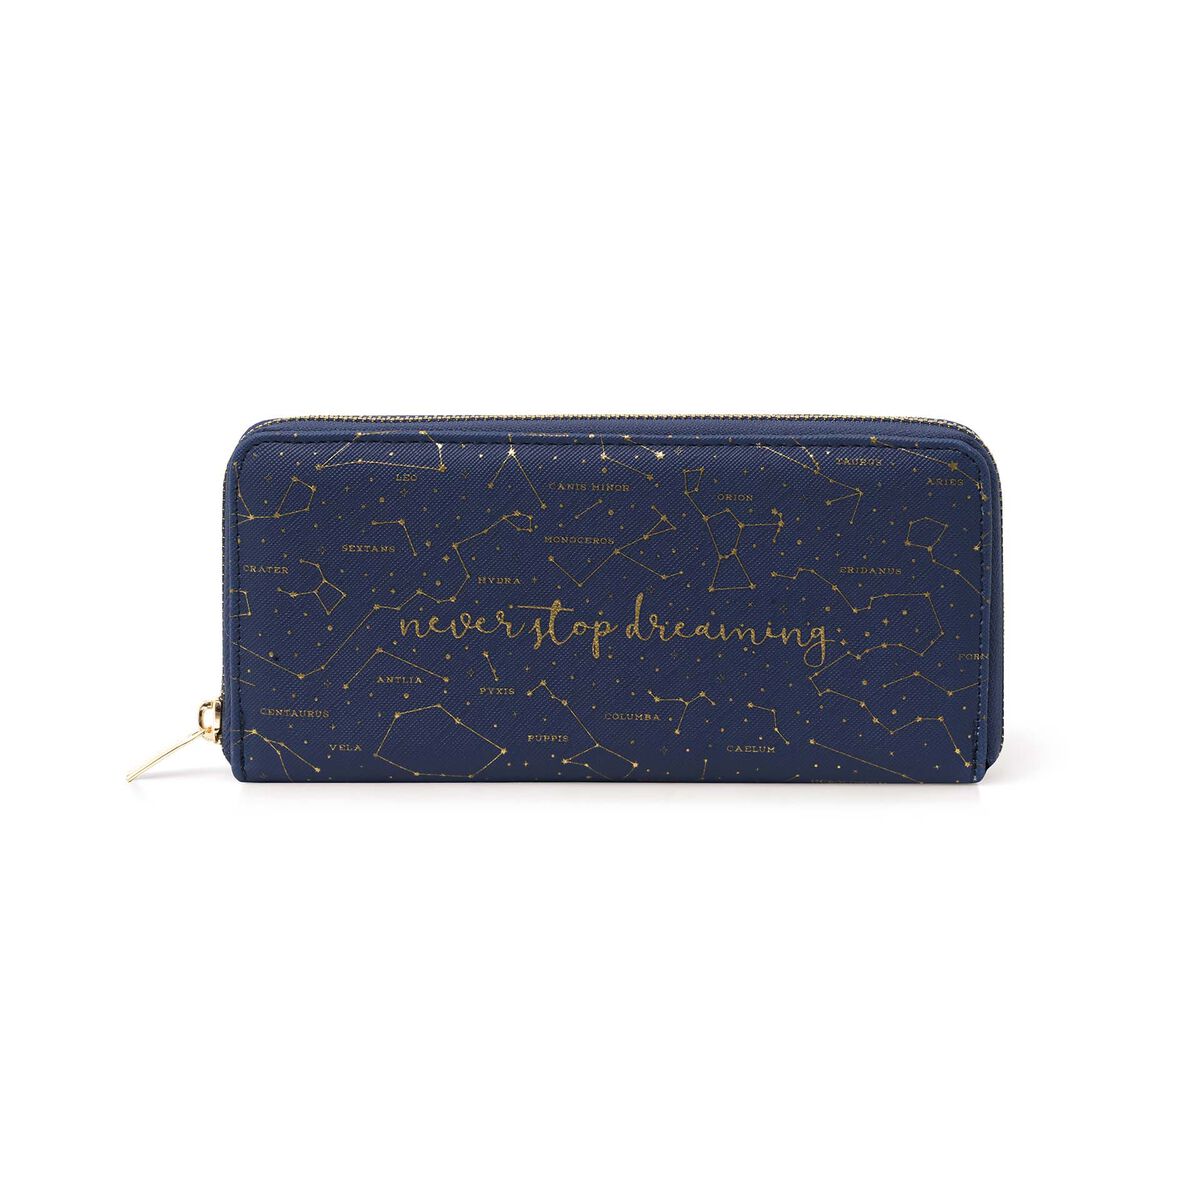 Monedero - What A Wallet!, , zoo